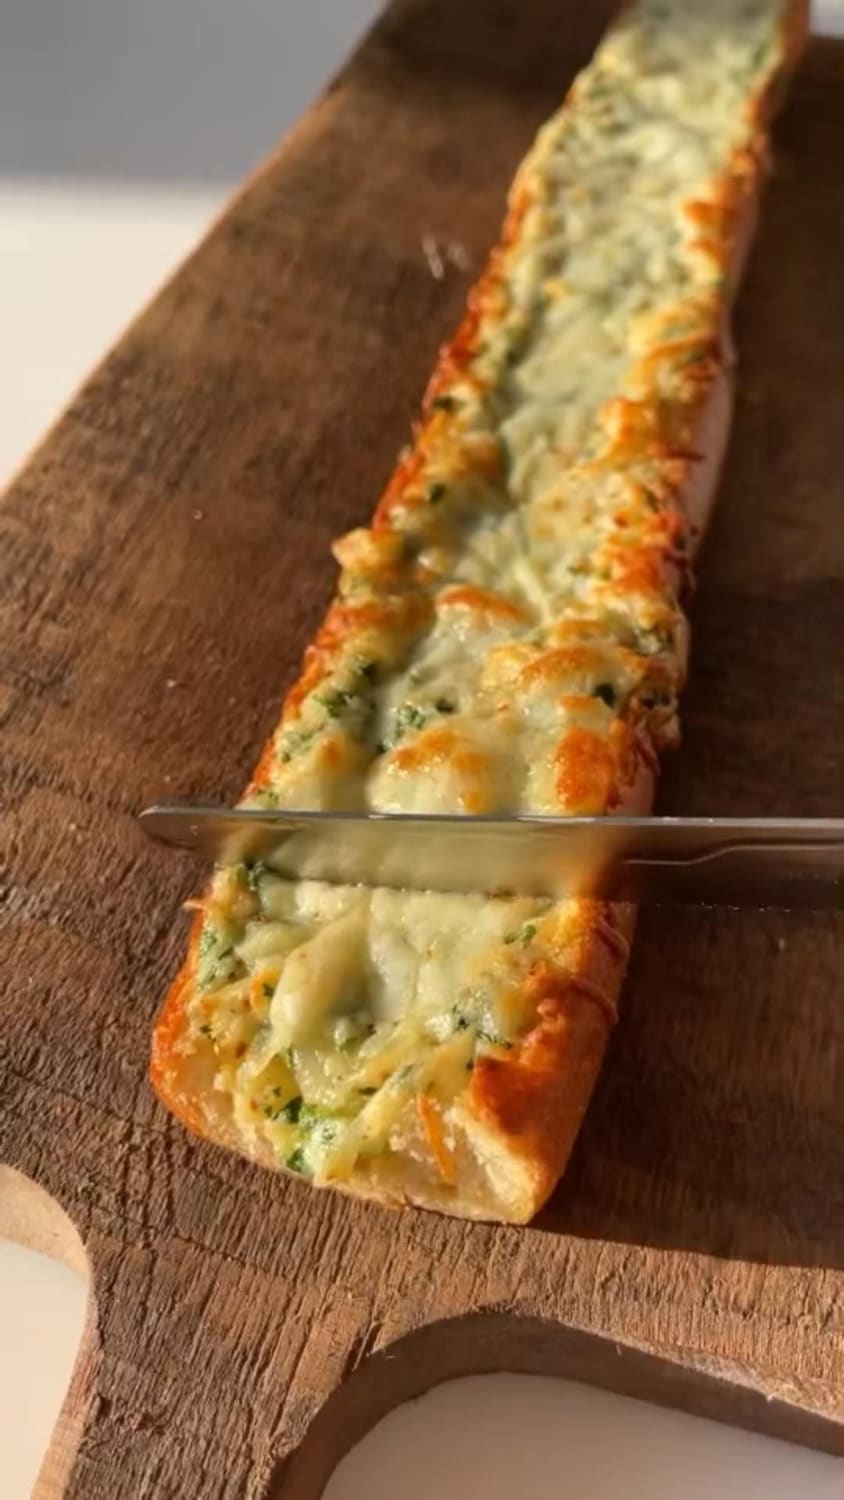 How to Make Garlic Bread. ( All credit goes to original Maker)